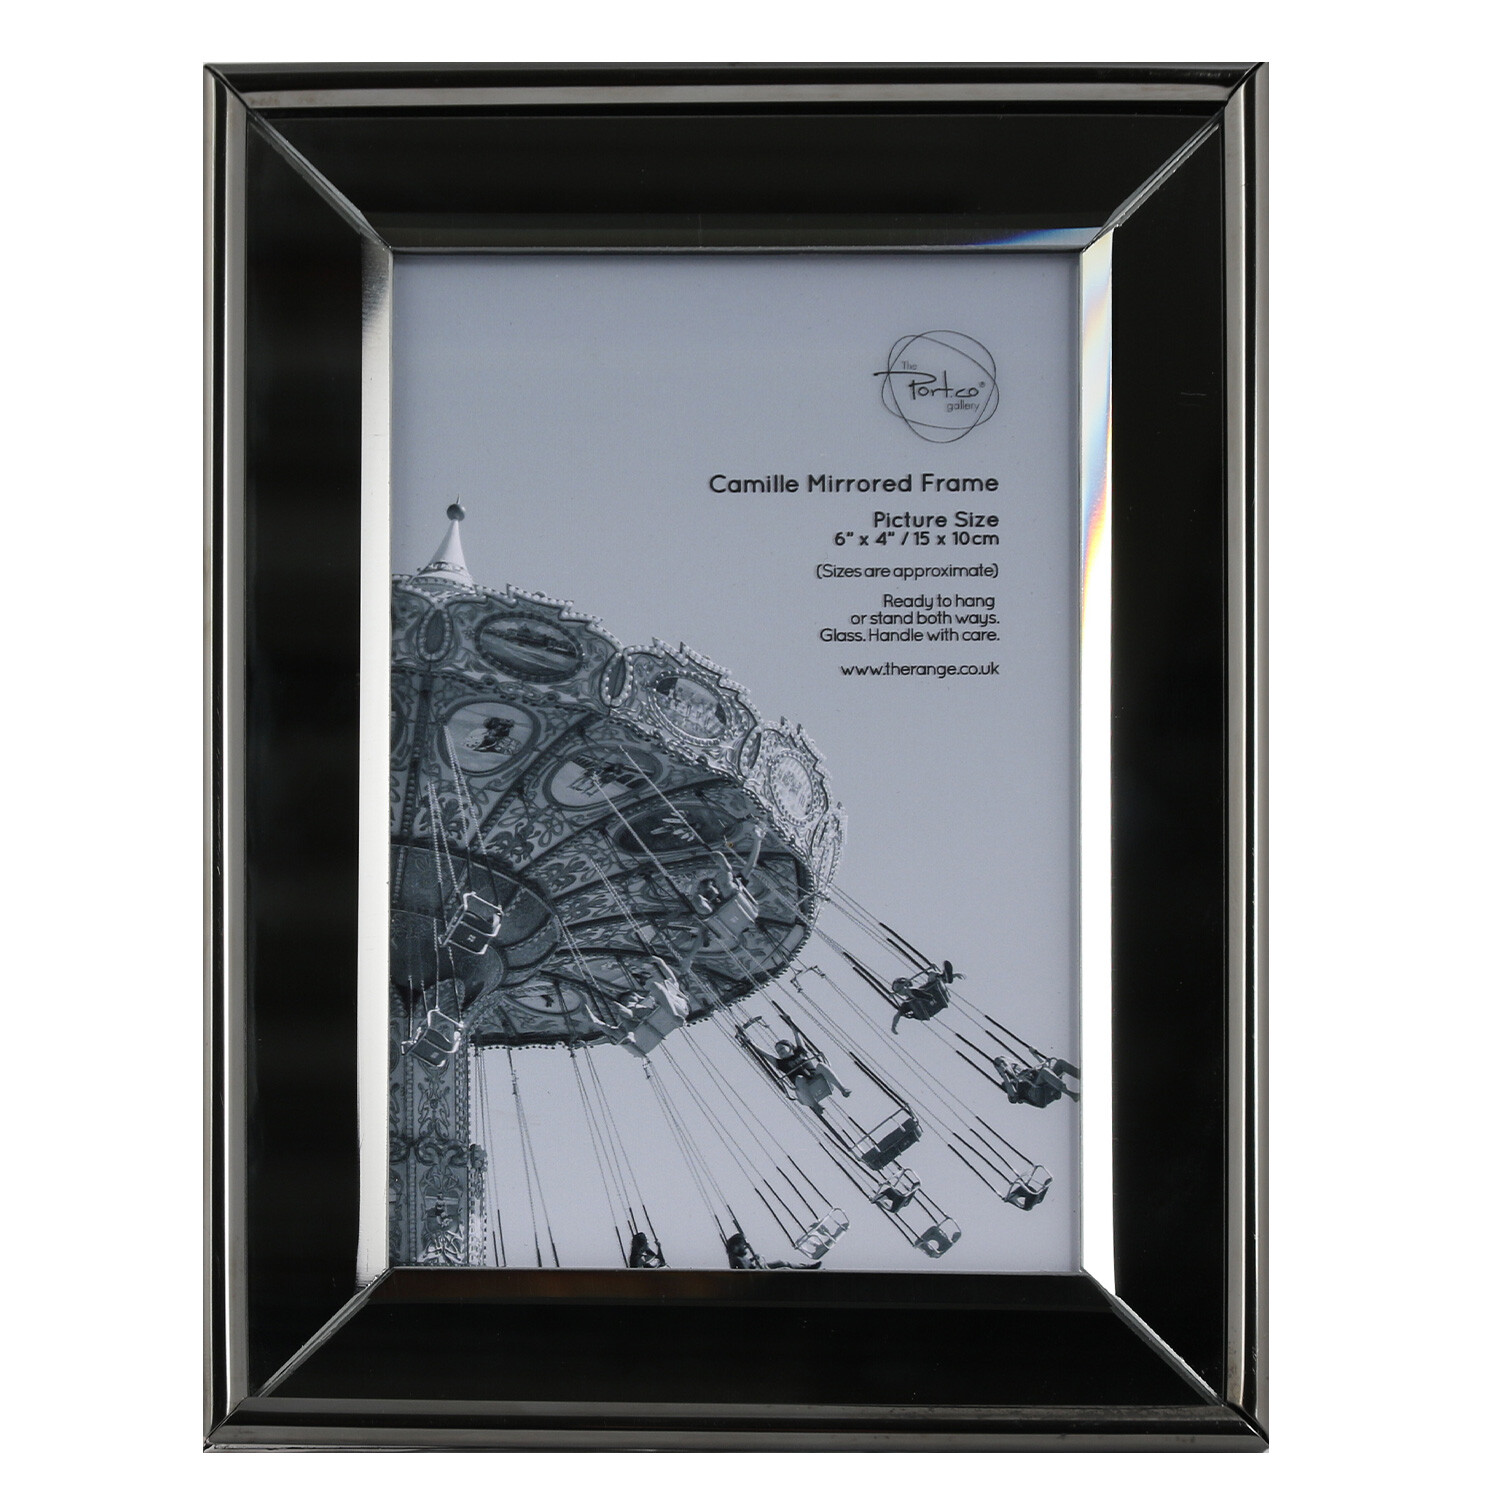 The Port. Co Gallery Camille Black Mirrored Photo Frame 6 x 4 inch Image